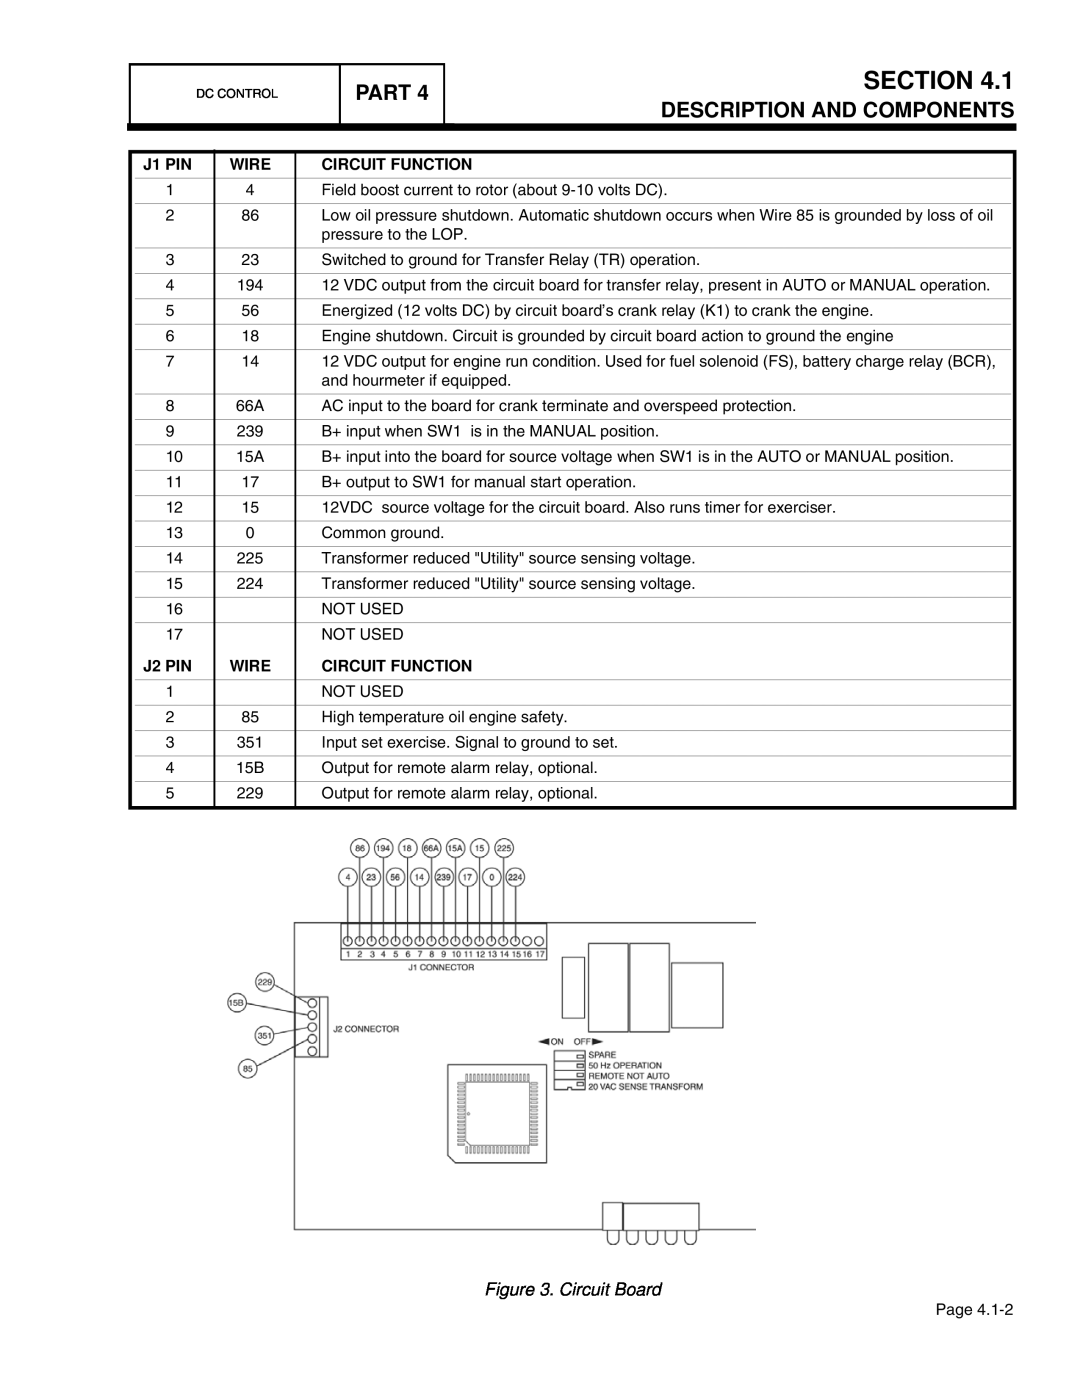 Guardian Technologies 4389, 4456 Section, Part, Description And Components, Circuit Board, J1 PIN, Wire, Circuit Function 